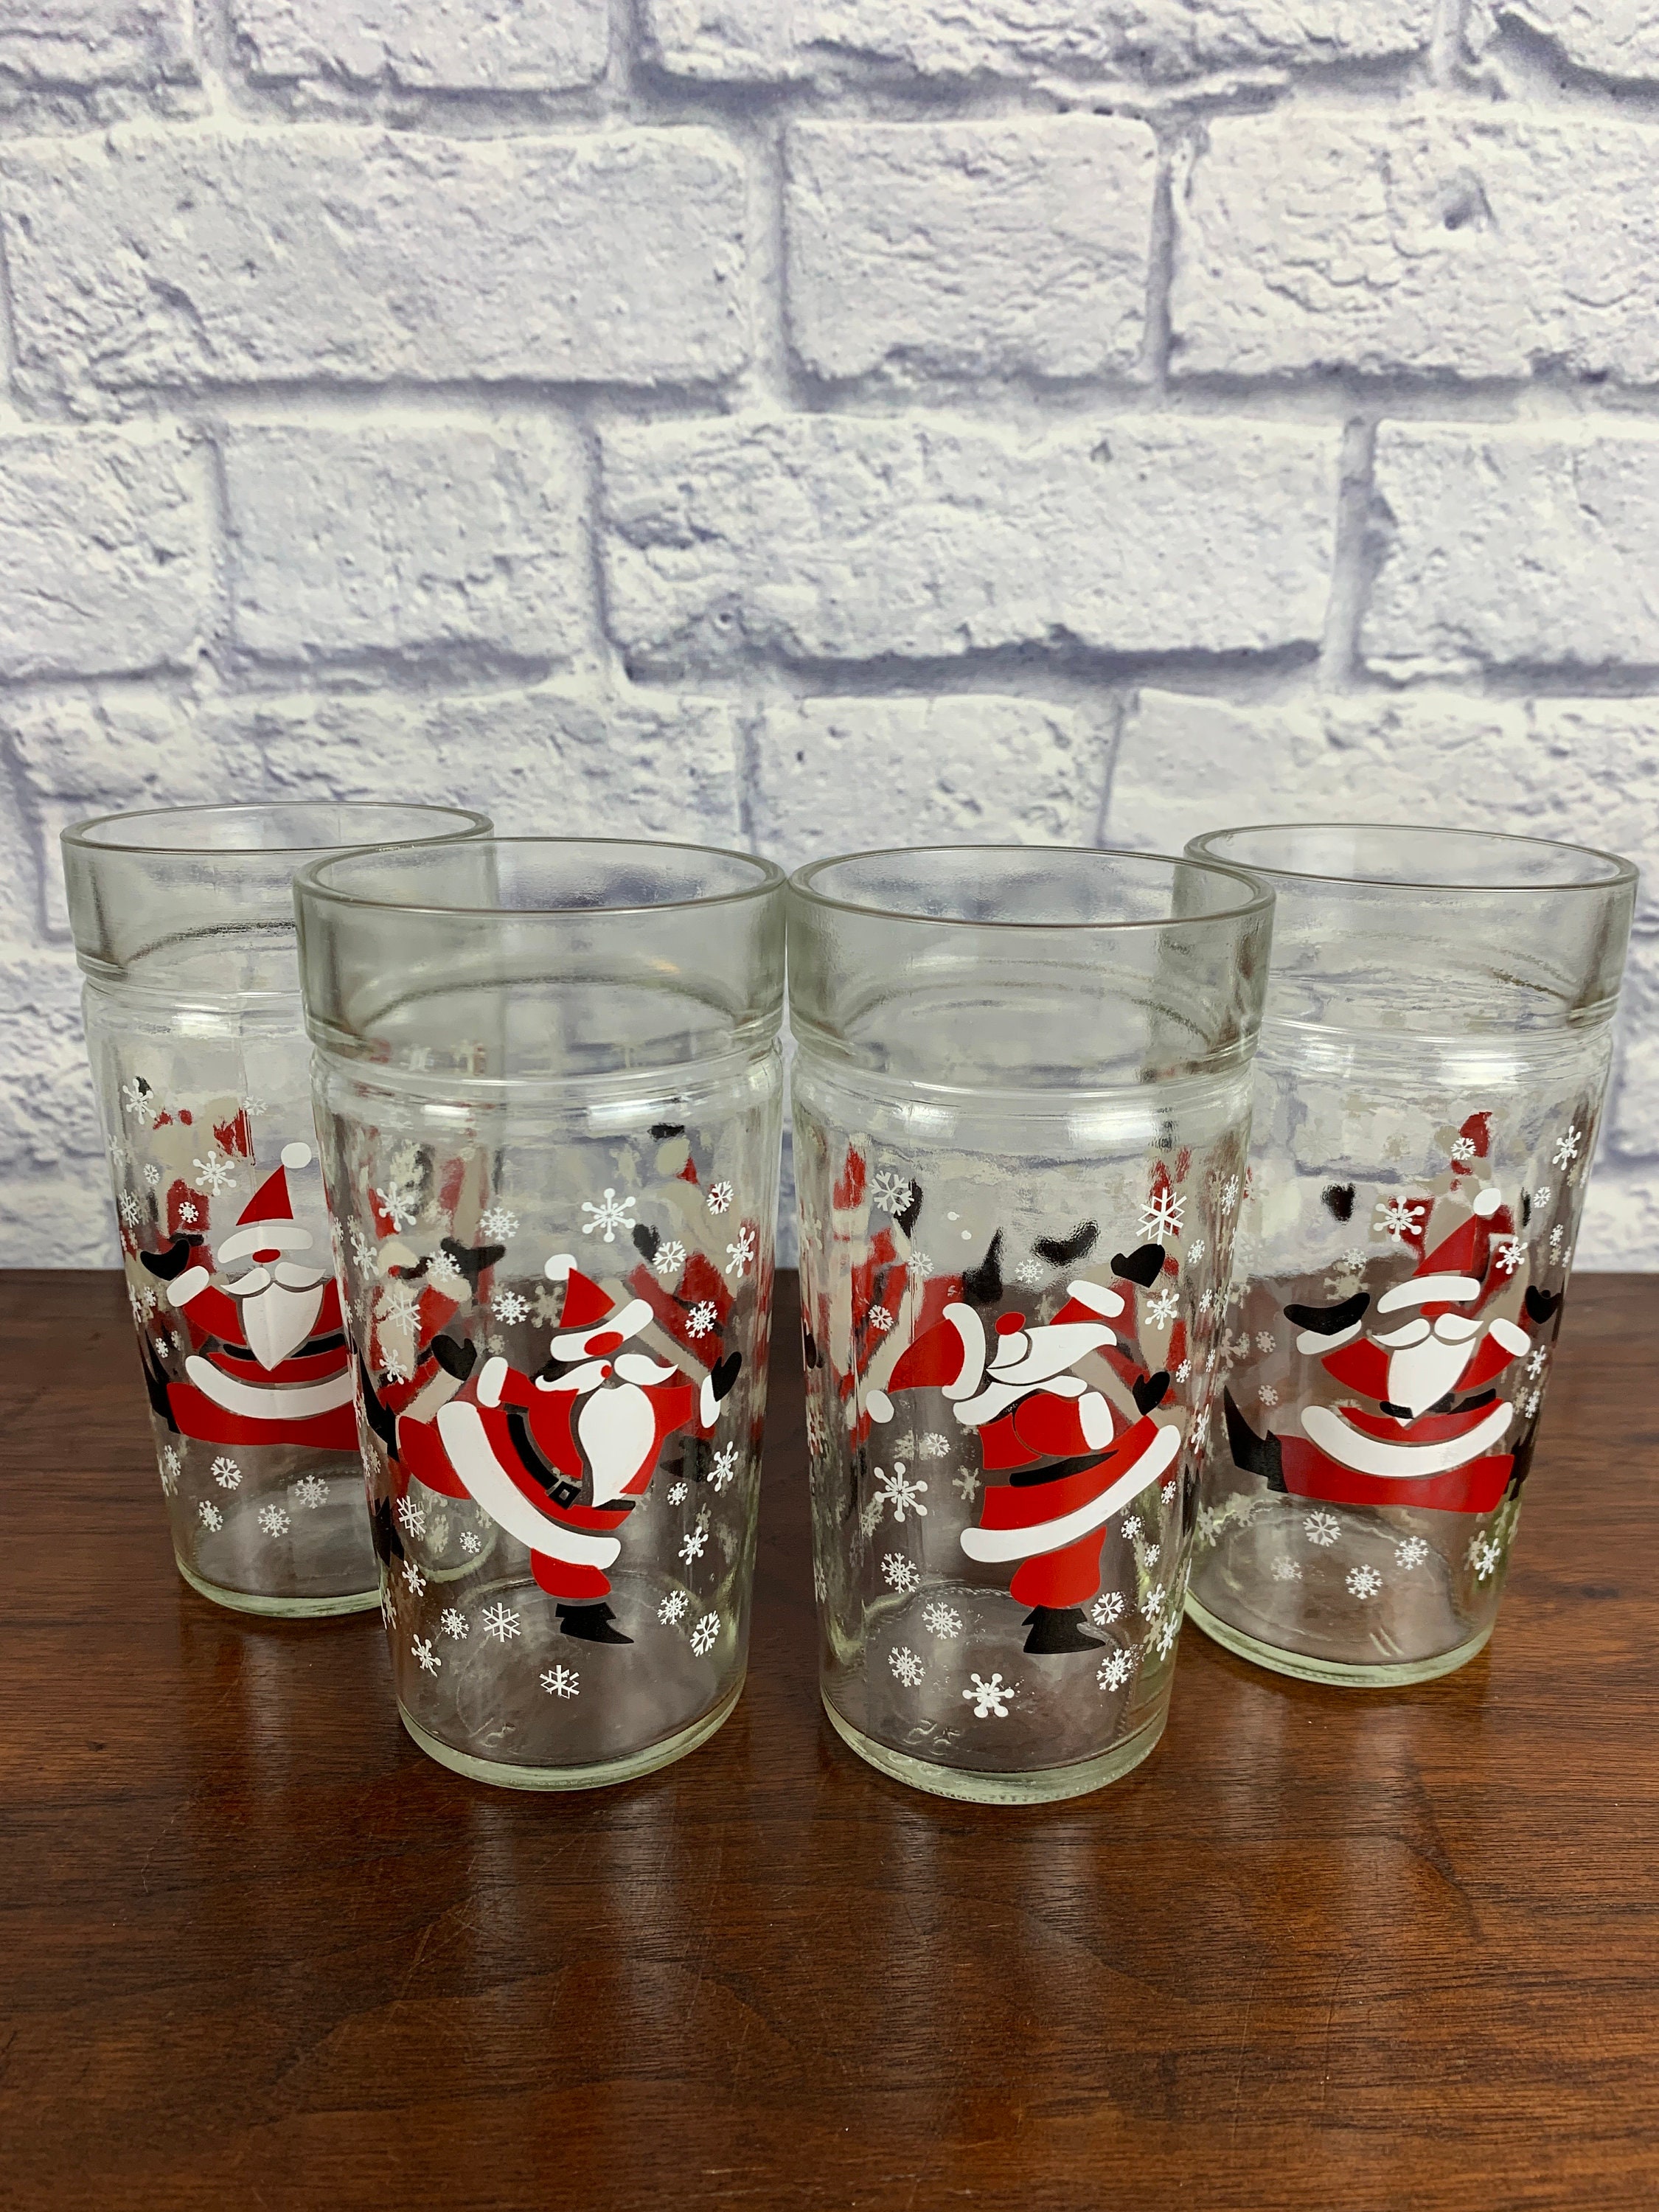 Leaping Santa Claus Anchor Hocking Thick 1970s Christmas Glasses